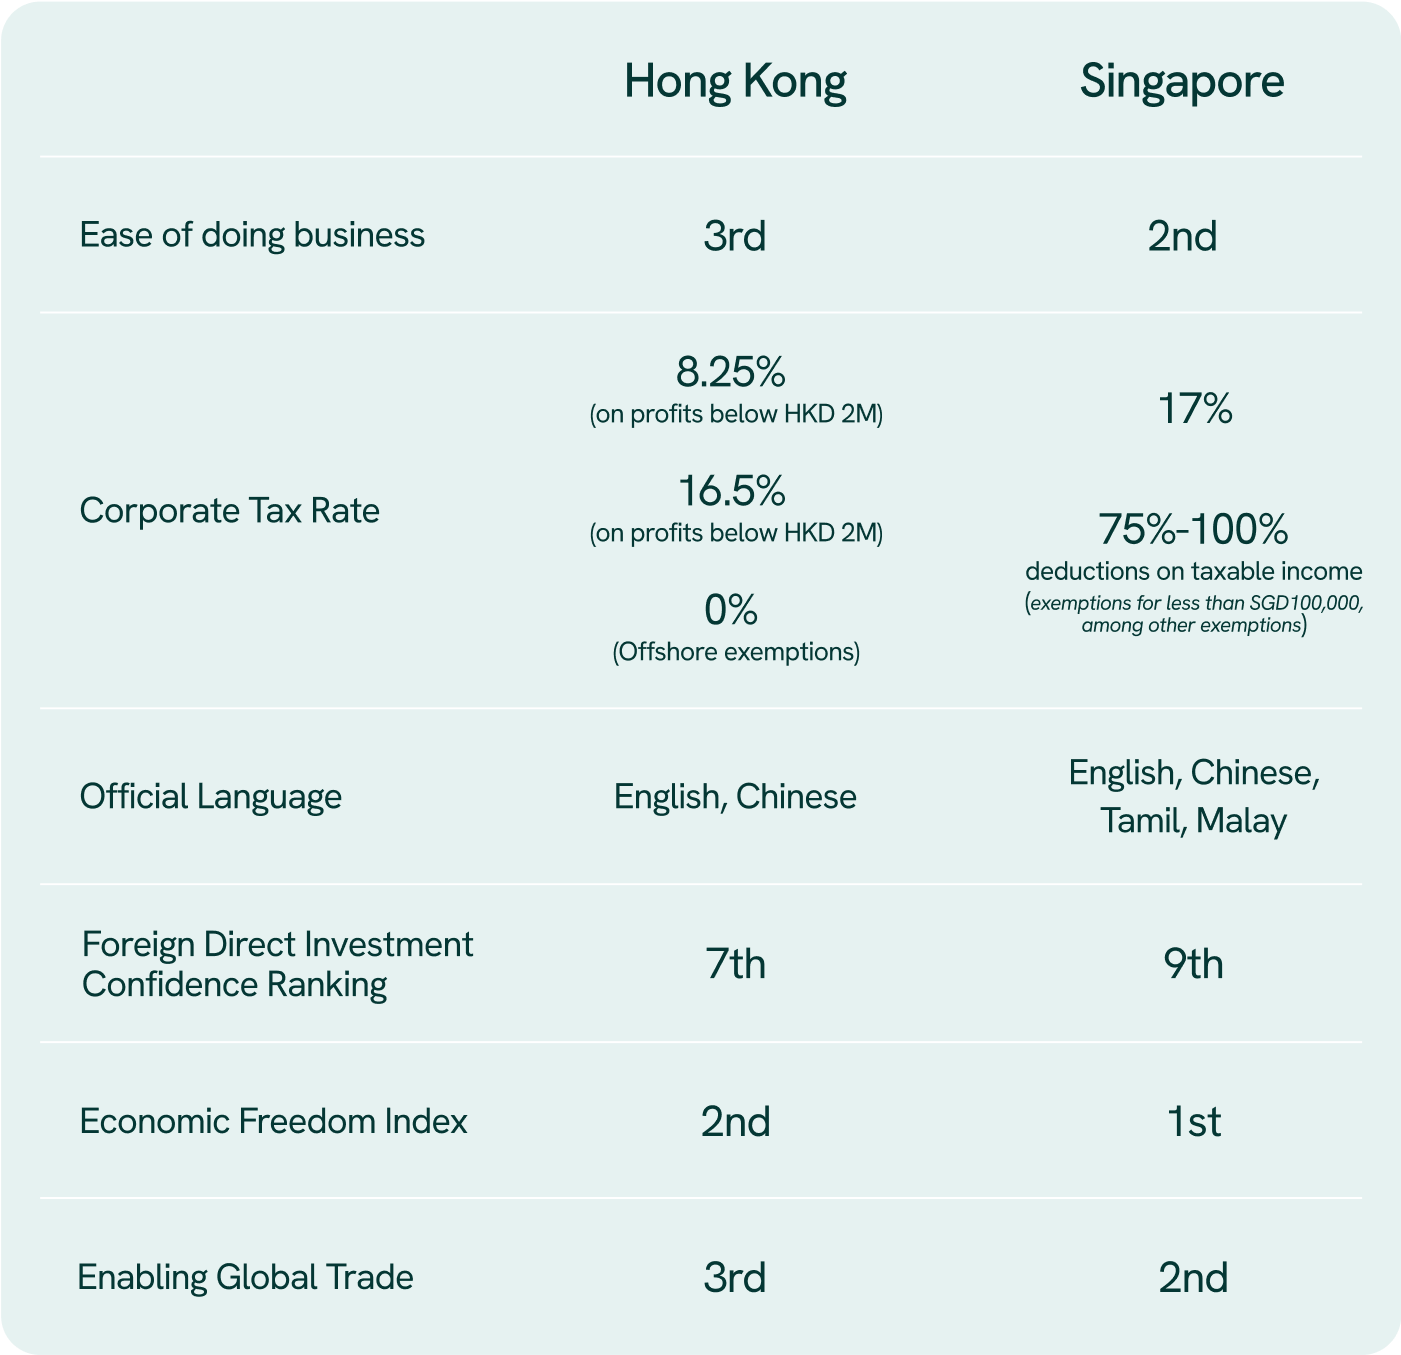 A graph showing the key differences between Hong Kong and Singapore for business jurisdiction